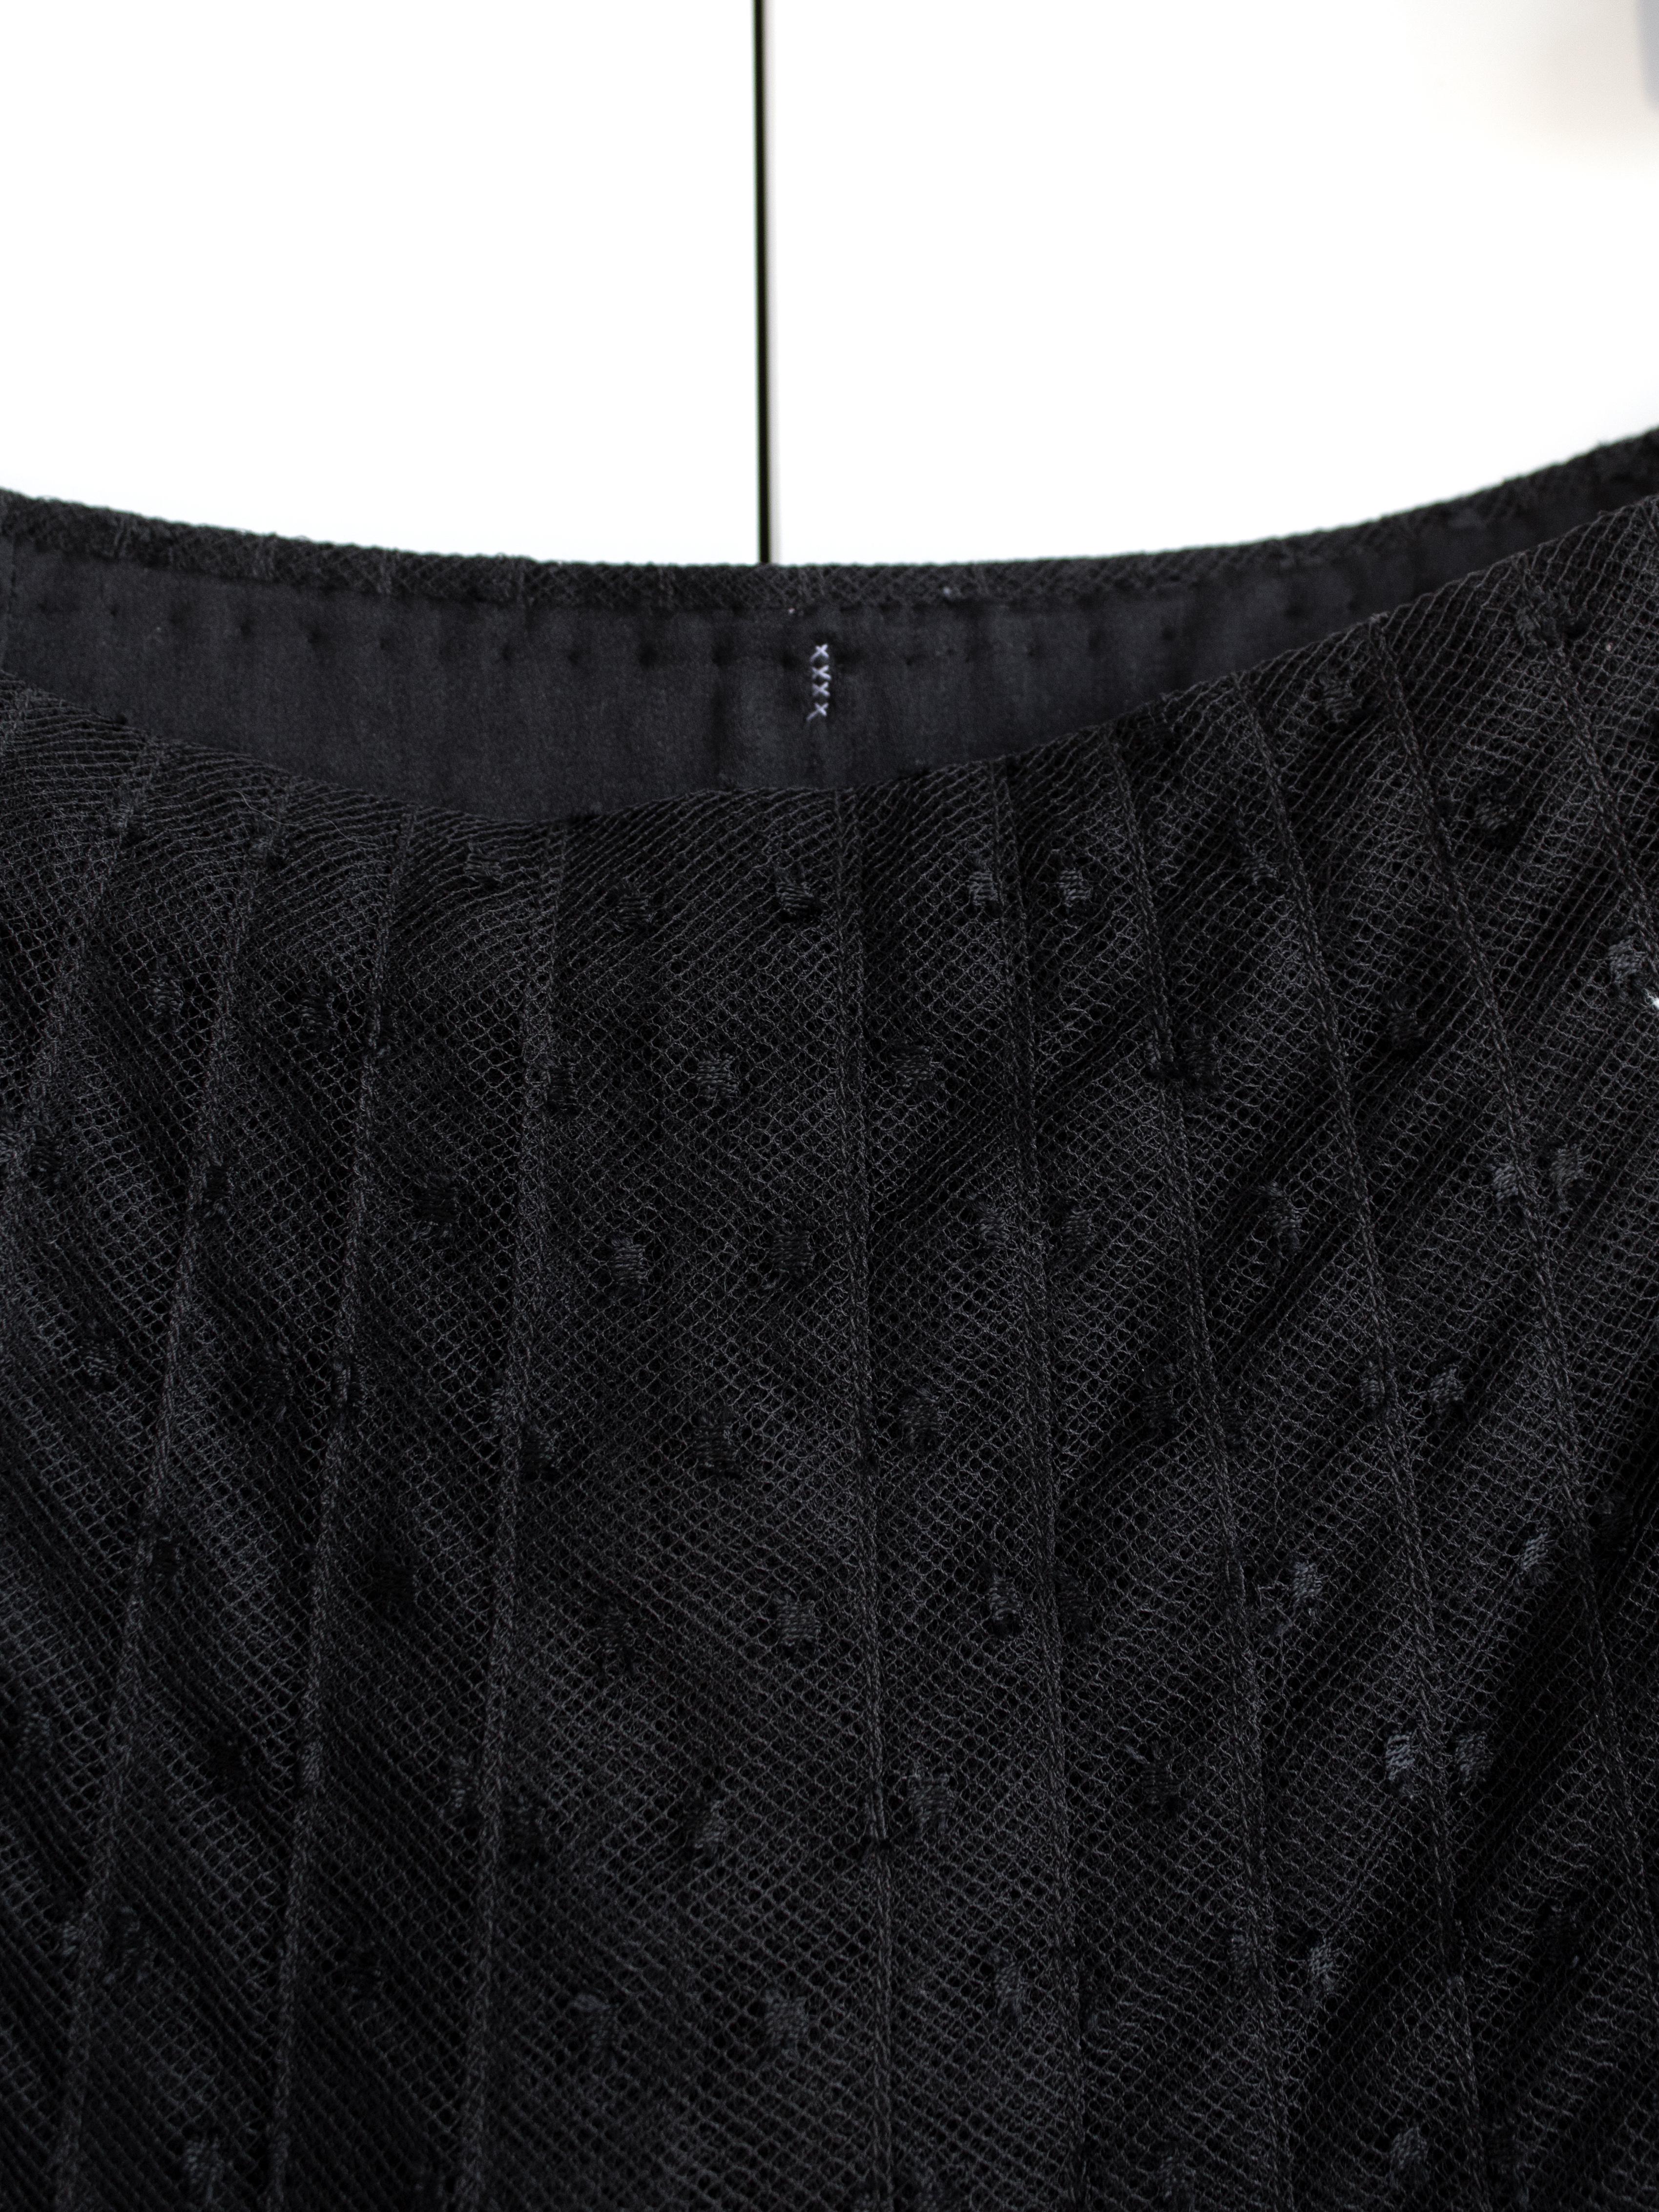 Chanel Vintage Haute Couture Fall/Winter 2003 Black Swiss Dot Tulle Skirt For Sale 10